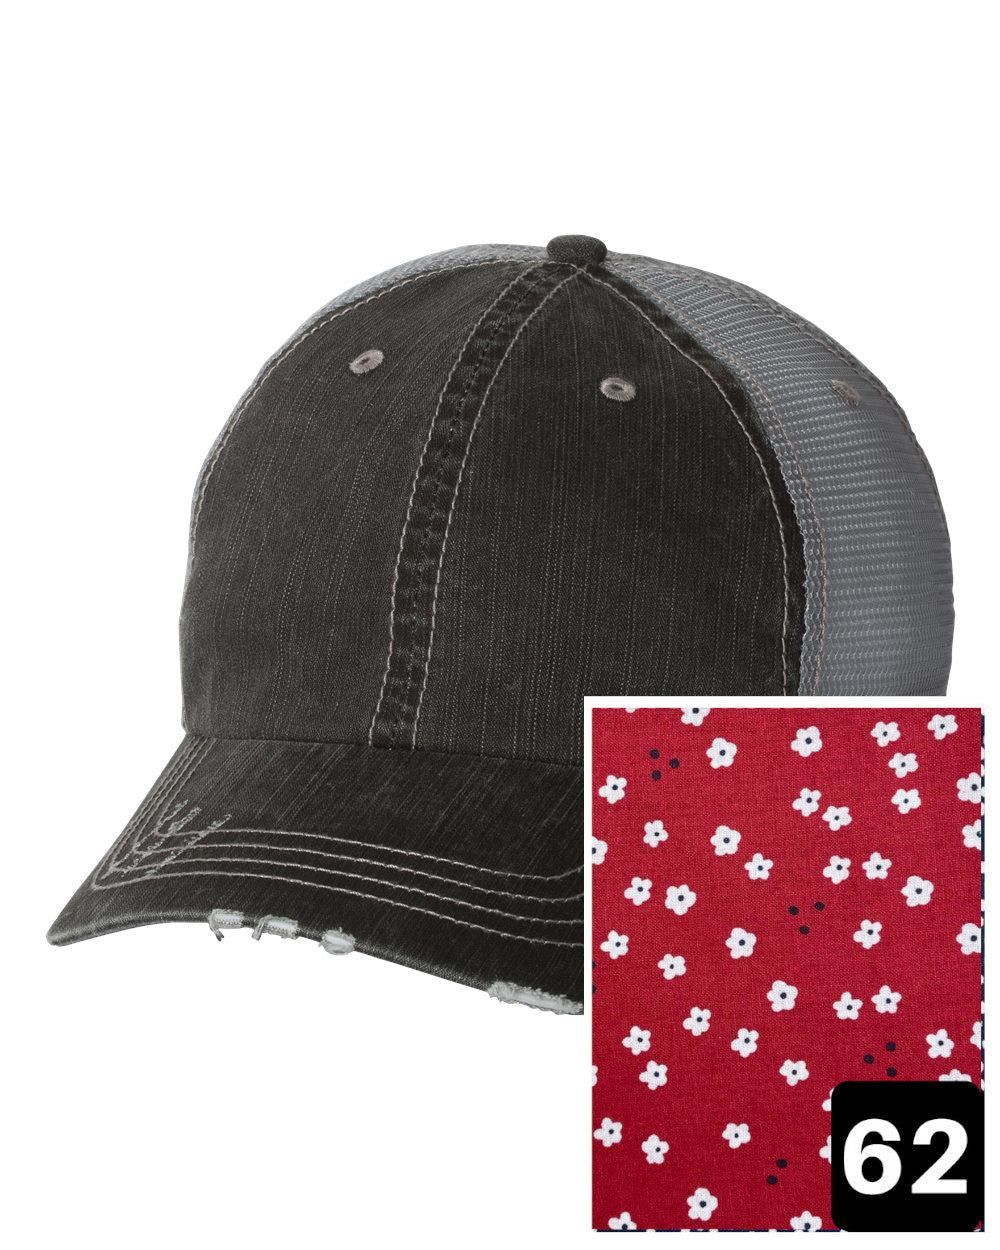 Maryland Hat | Gray Distressed Trucker Cap | Many Fabric Choices